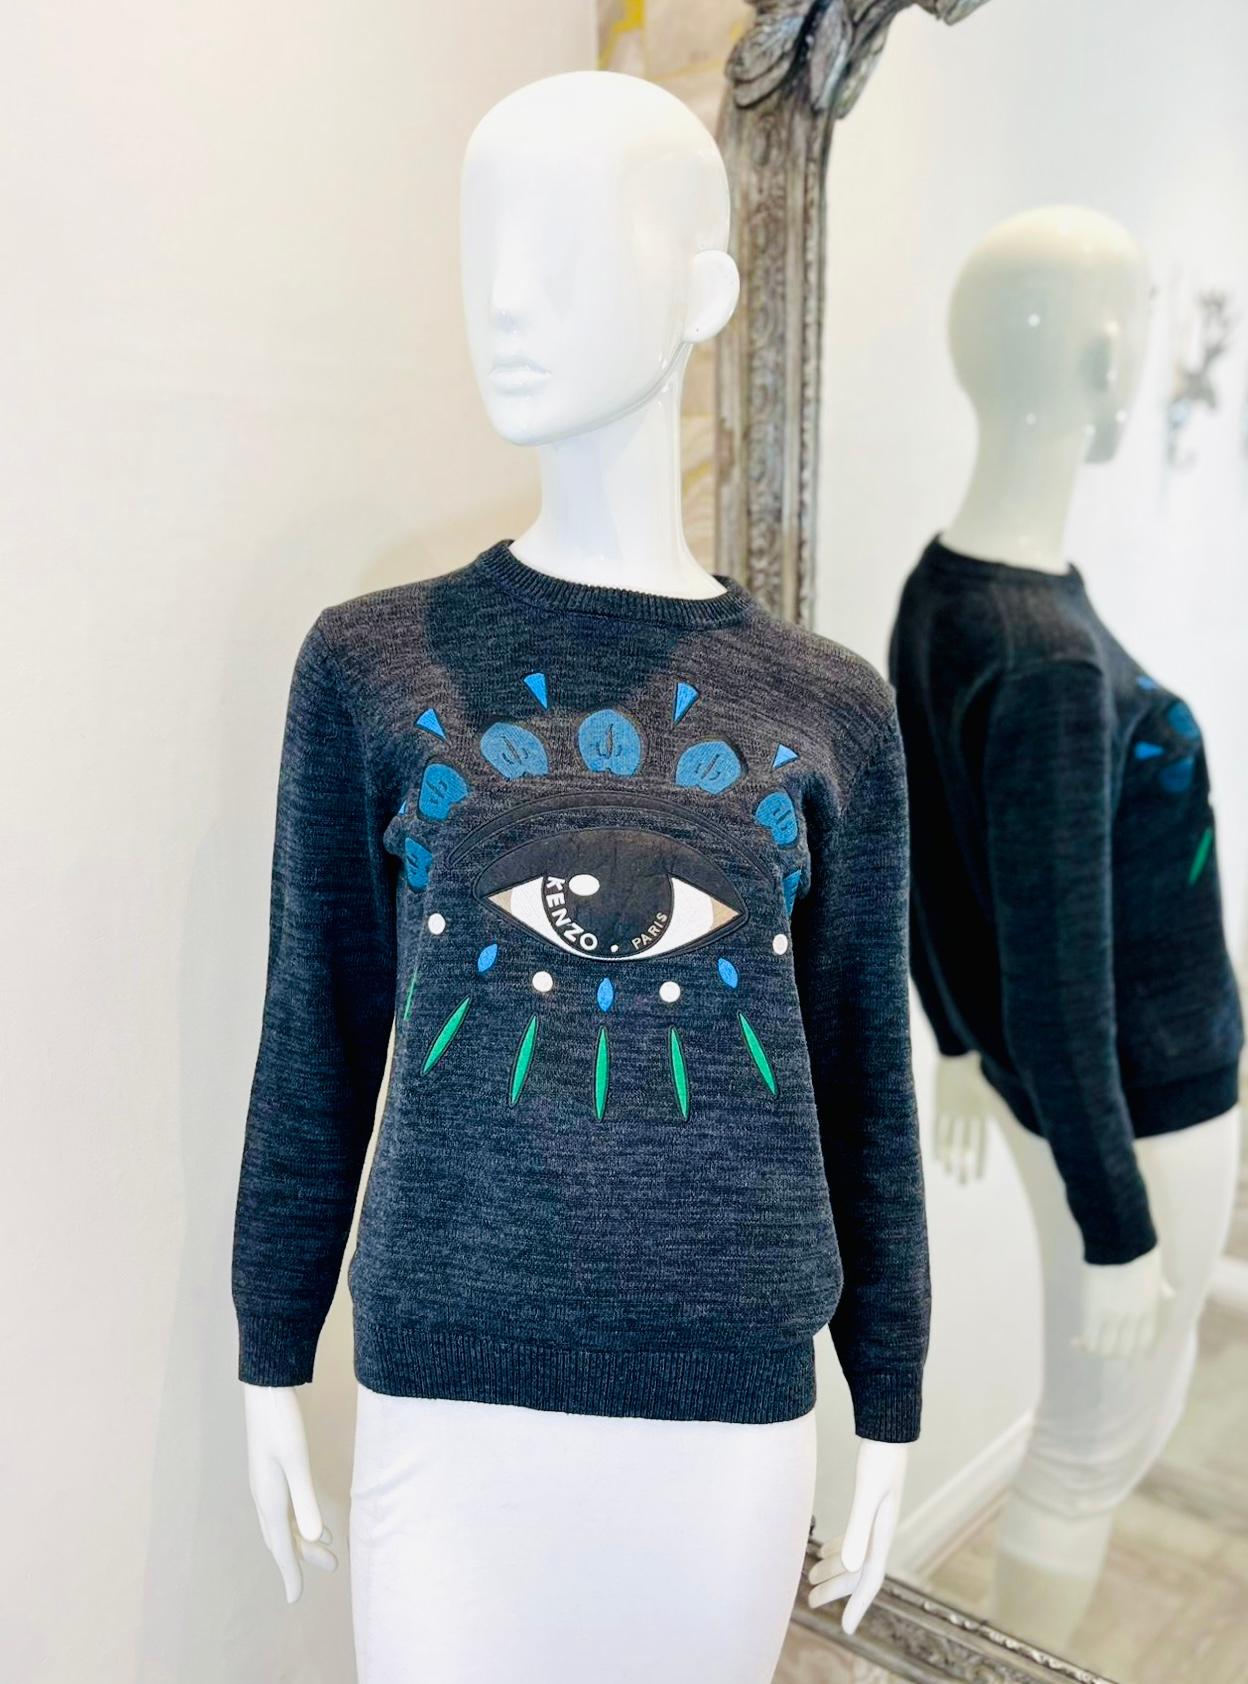 Kenzo 'Eye' Motif Cotton Jumper

Dark grey jumper designed with iconic 'Eye' motif to the centre detailed with white 'Kenzo Paris' lettering.

Featuring crew neckline, ribbed cuffs and hem and regular fit.

Size – S

Condition – Very